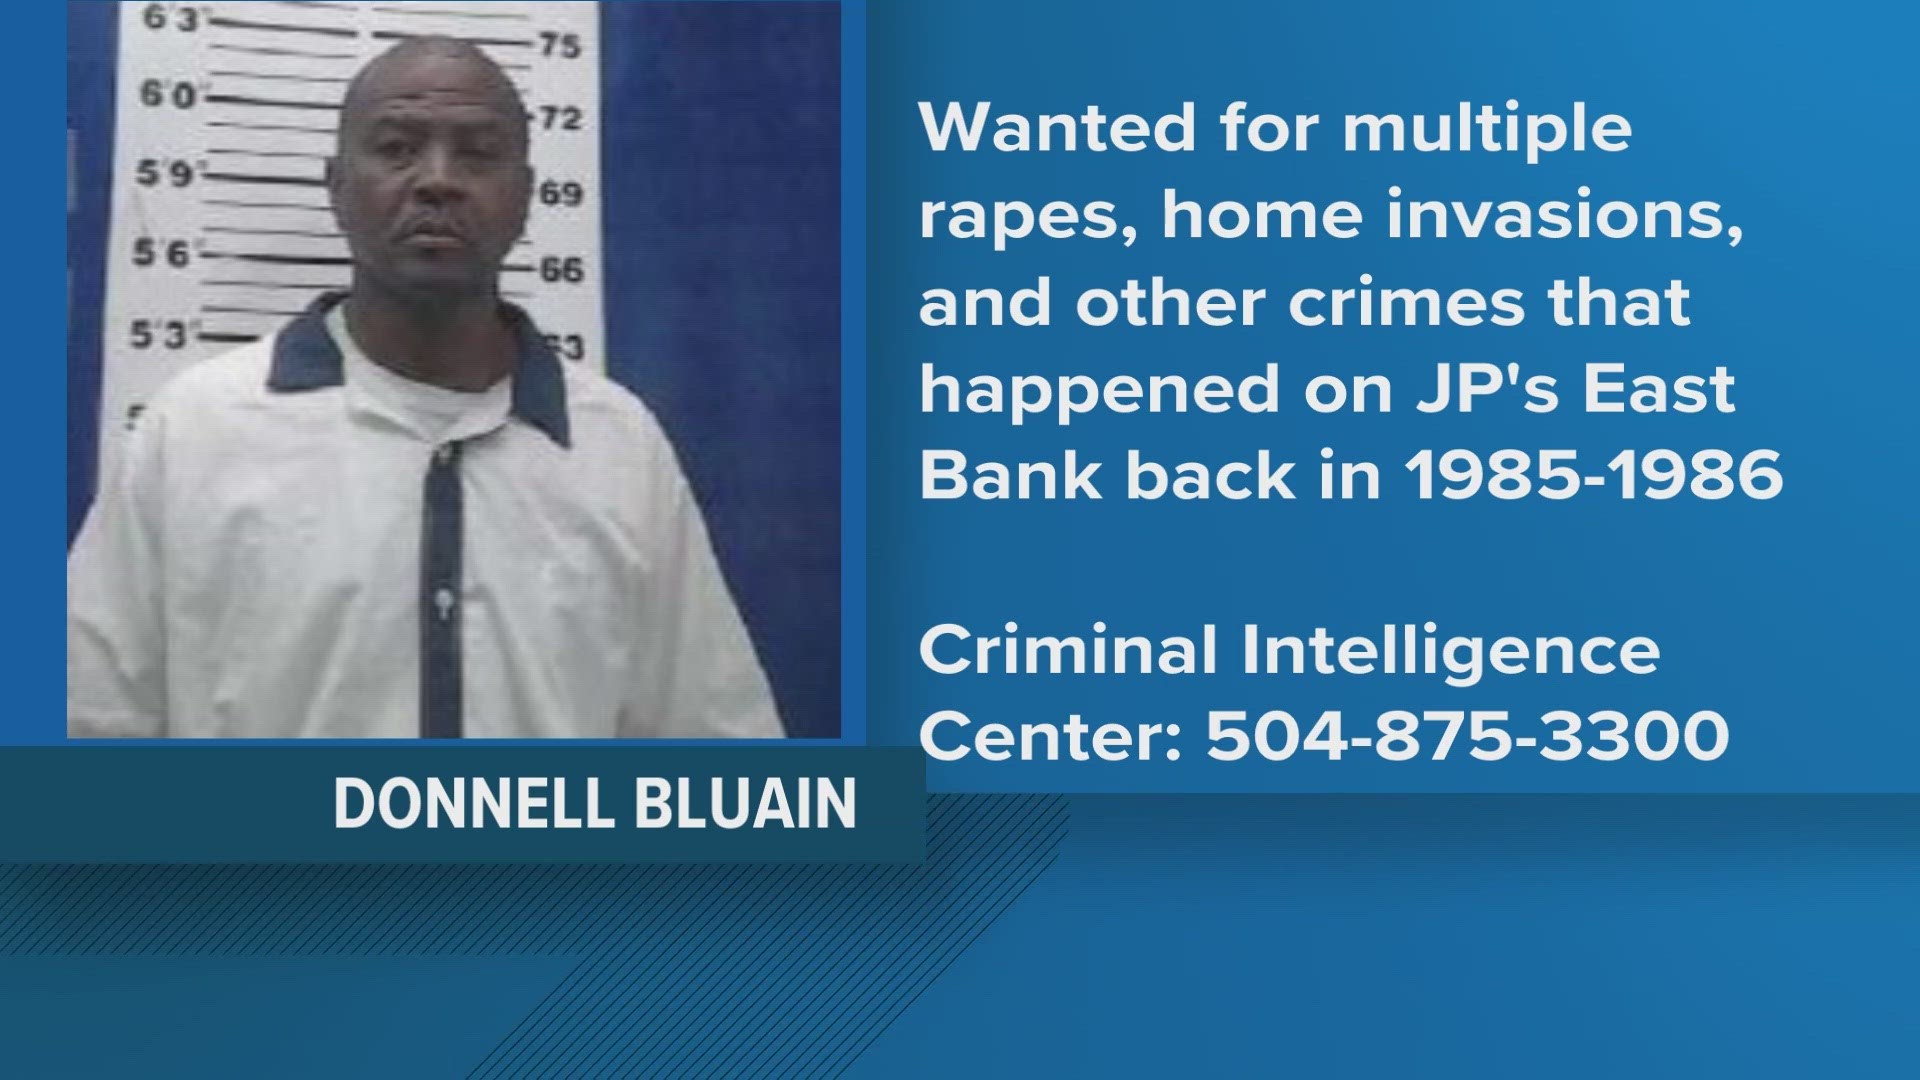 58-year-old Donnell Bluain is wanted for multiple rapes that happened on the East Bank of Jefferson Parish between 1985 and 1986.